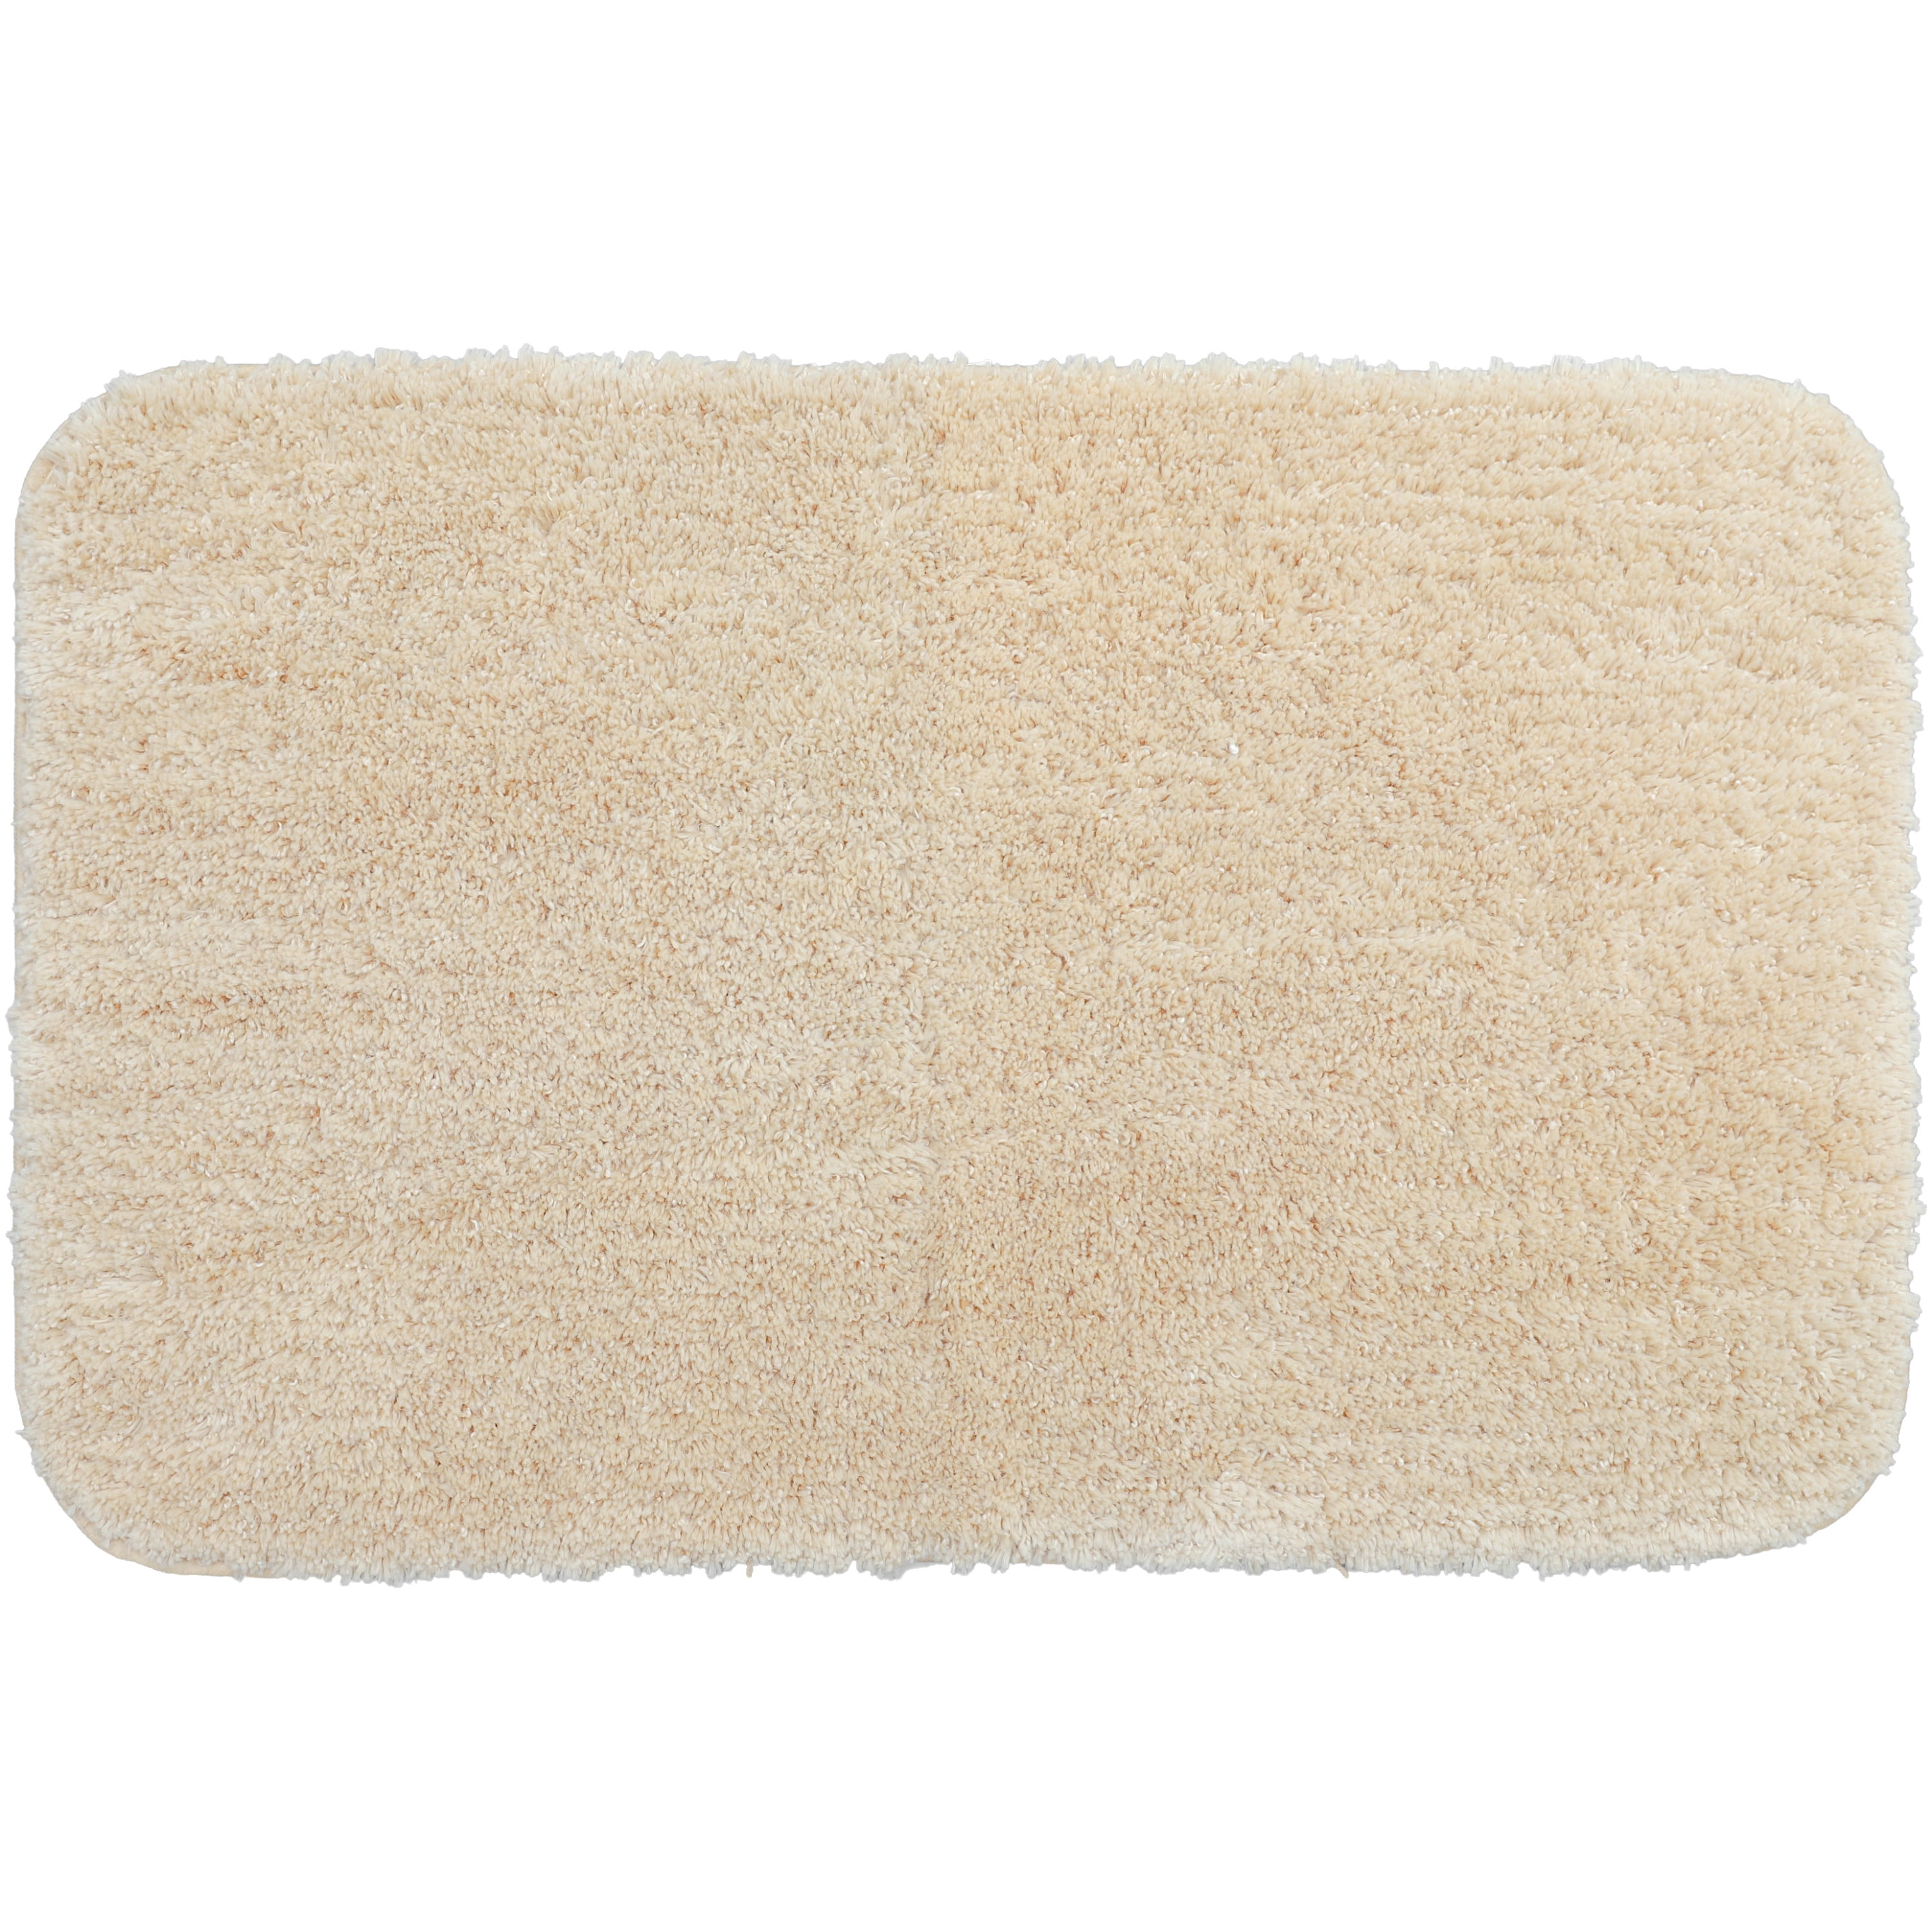 Mohawk Home Duo Gold Bath Rug Scatter, 2'x3'2